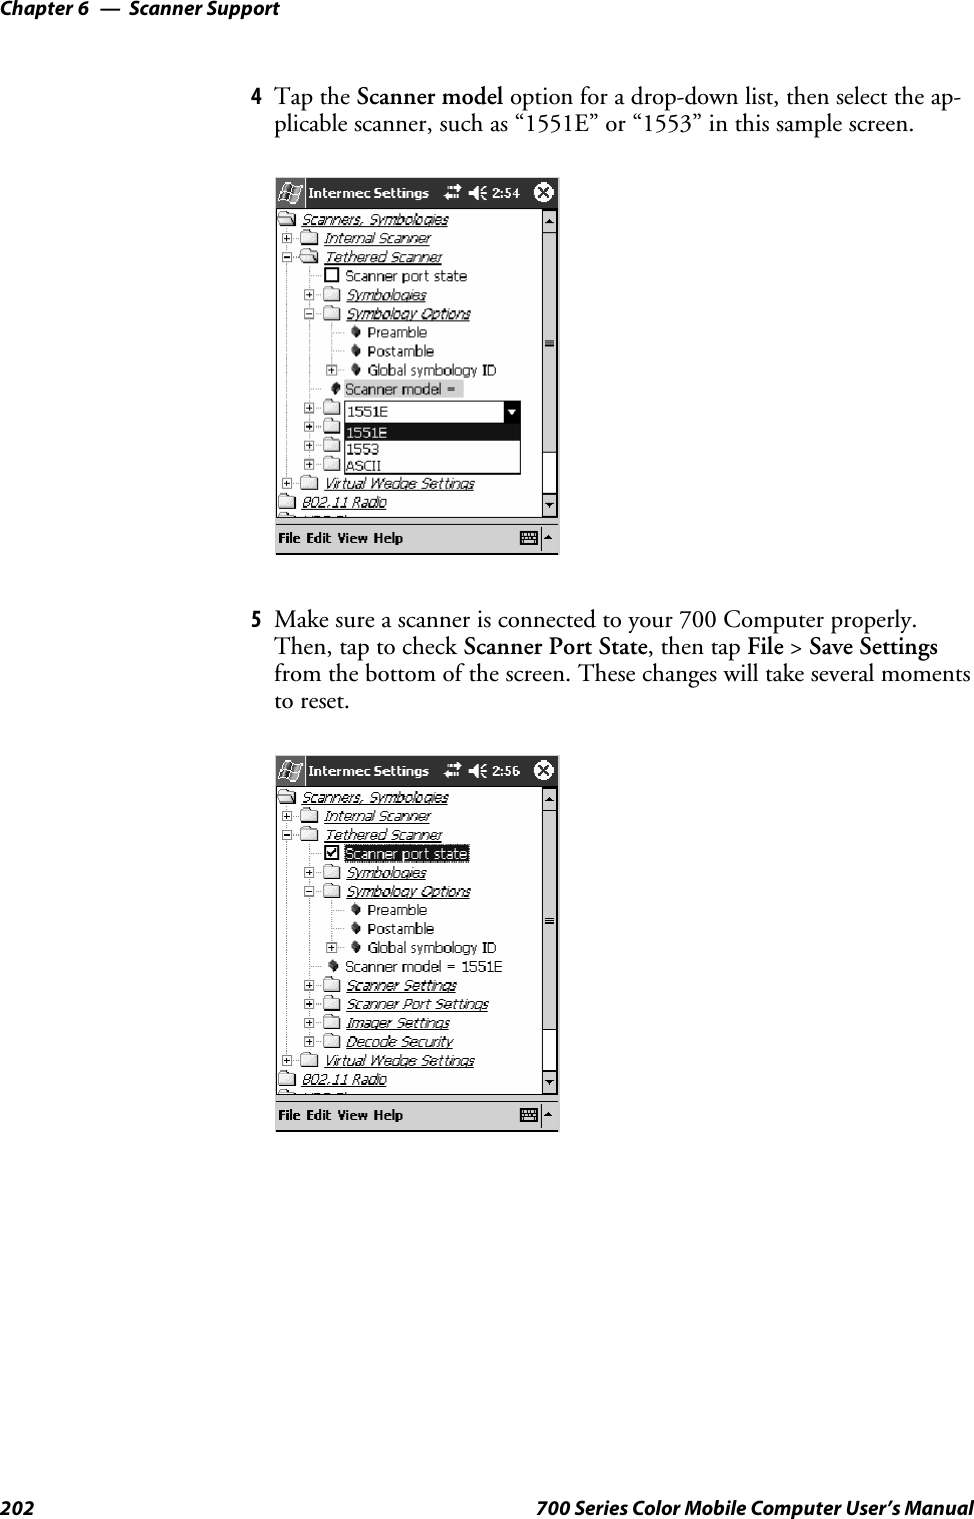 Scanner SupportChapter —6202 700 Series Color Mobile Computer User’s Manual4Tap the Scanner model option for a drop-down list, then select the ap-plicable scanner, such as “1551E” or “1553” in this sample screen.5Make sure a scanner is connected to your 700 Computer properly.Then, tap to check Scanner Port State,thentapFile &gt;Save Settingsfrom the bottom of the screen. These changes will take several momentsto reset.